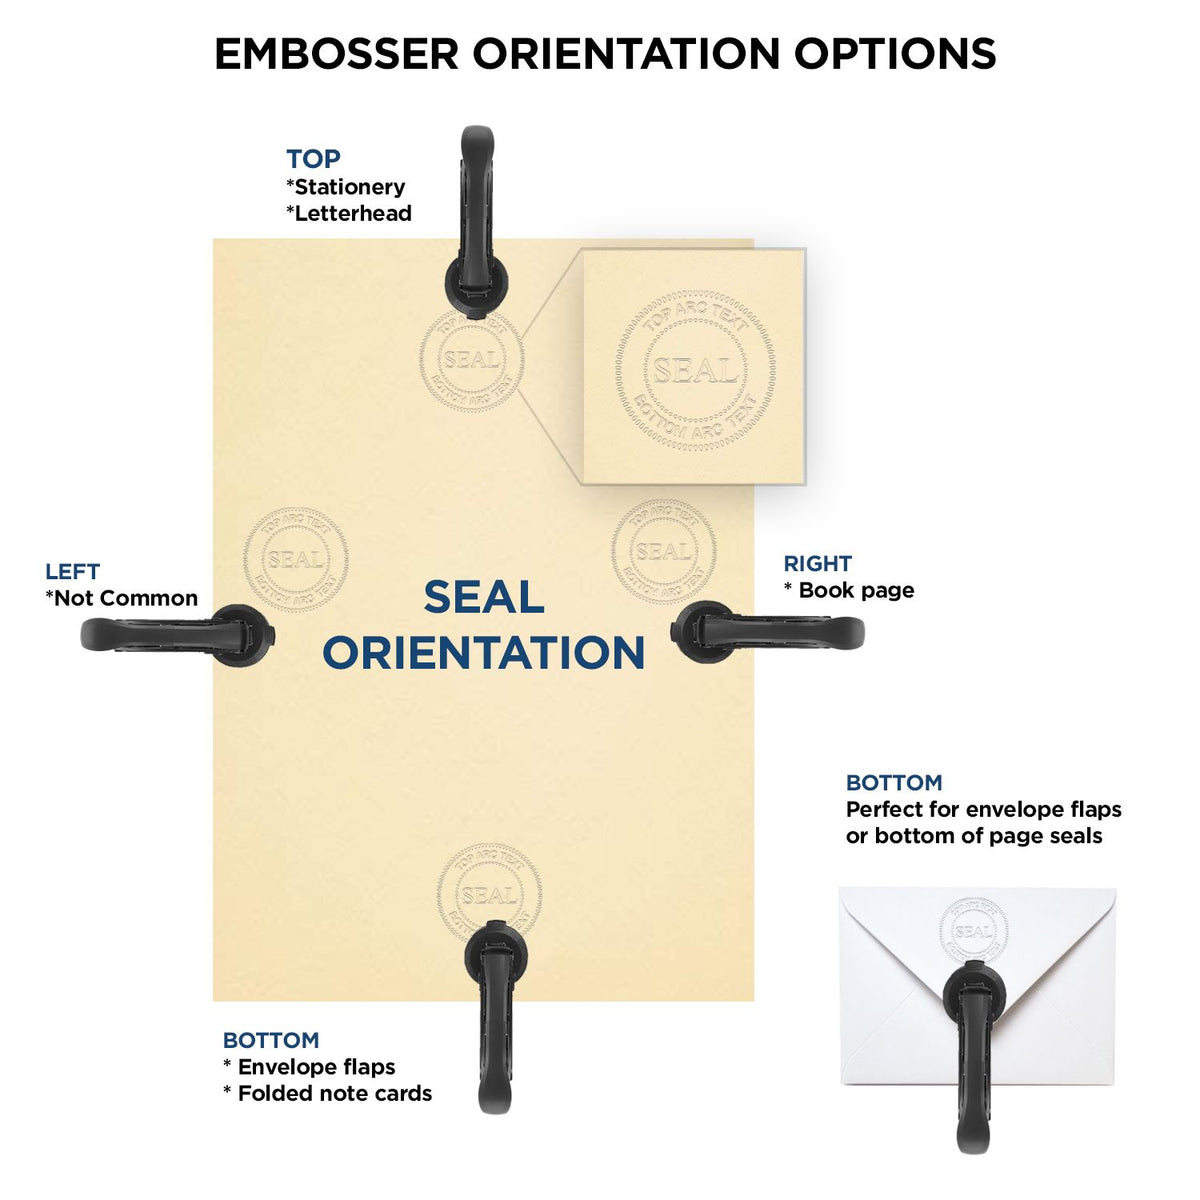 An infographic for the Heavy Duty Cast Iron Vermont Geologist Seal Embosser showing embosser orientation, this is showing examples of a top, bottom, right and left insert.